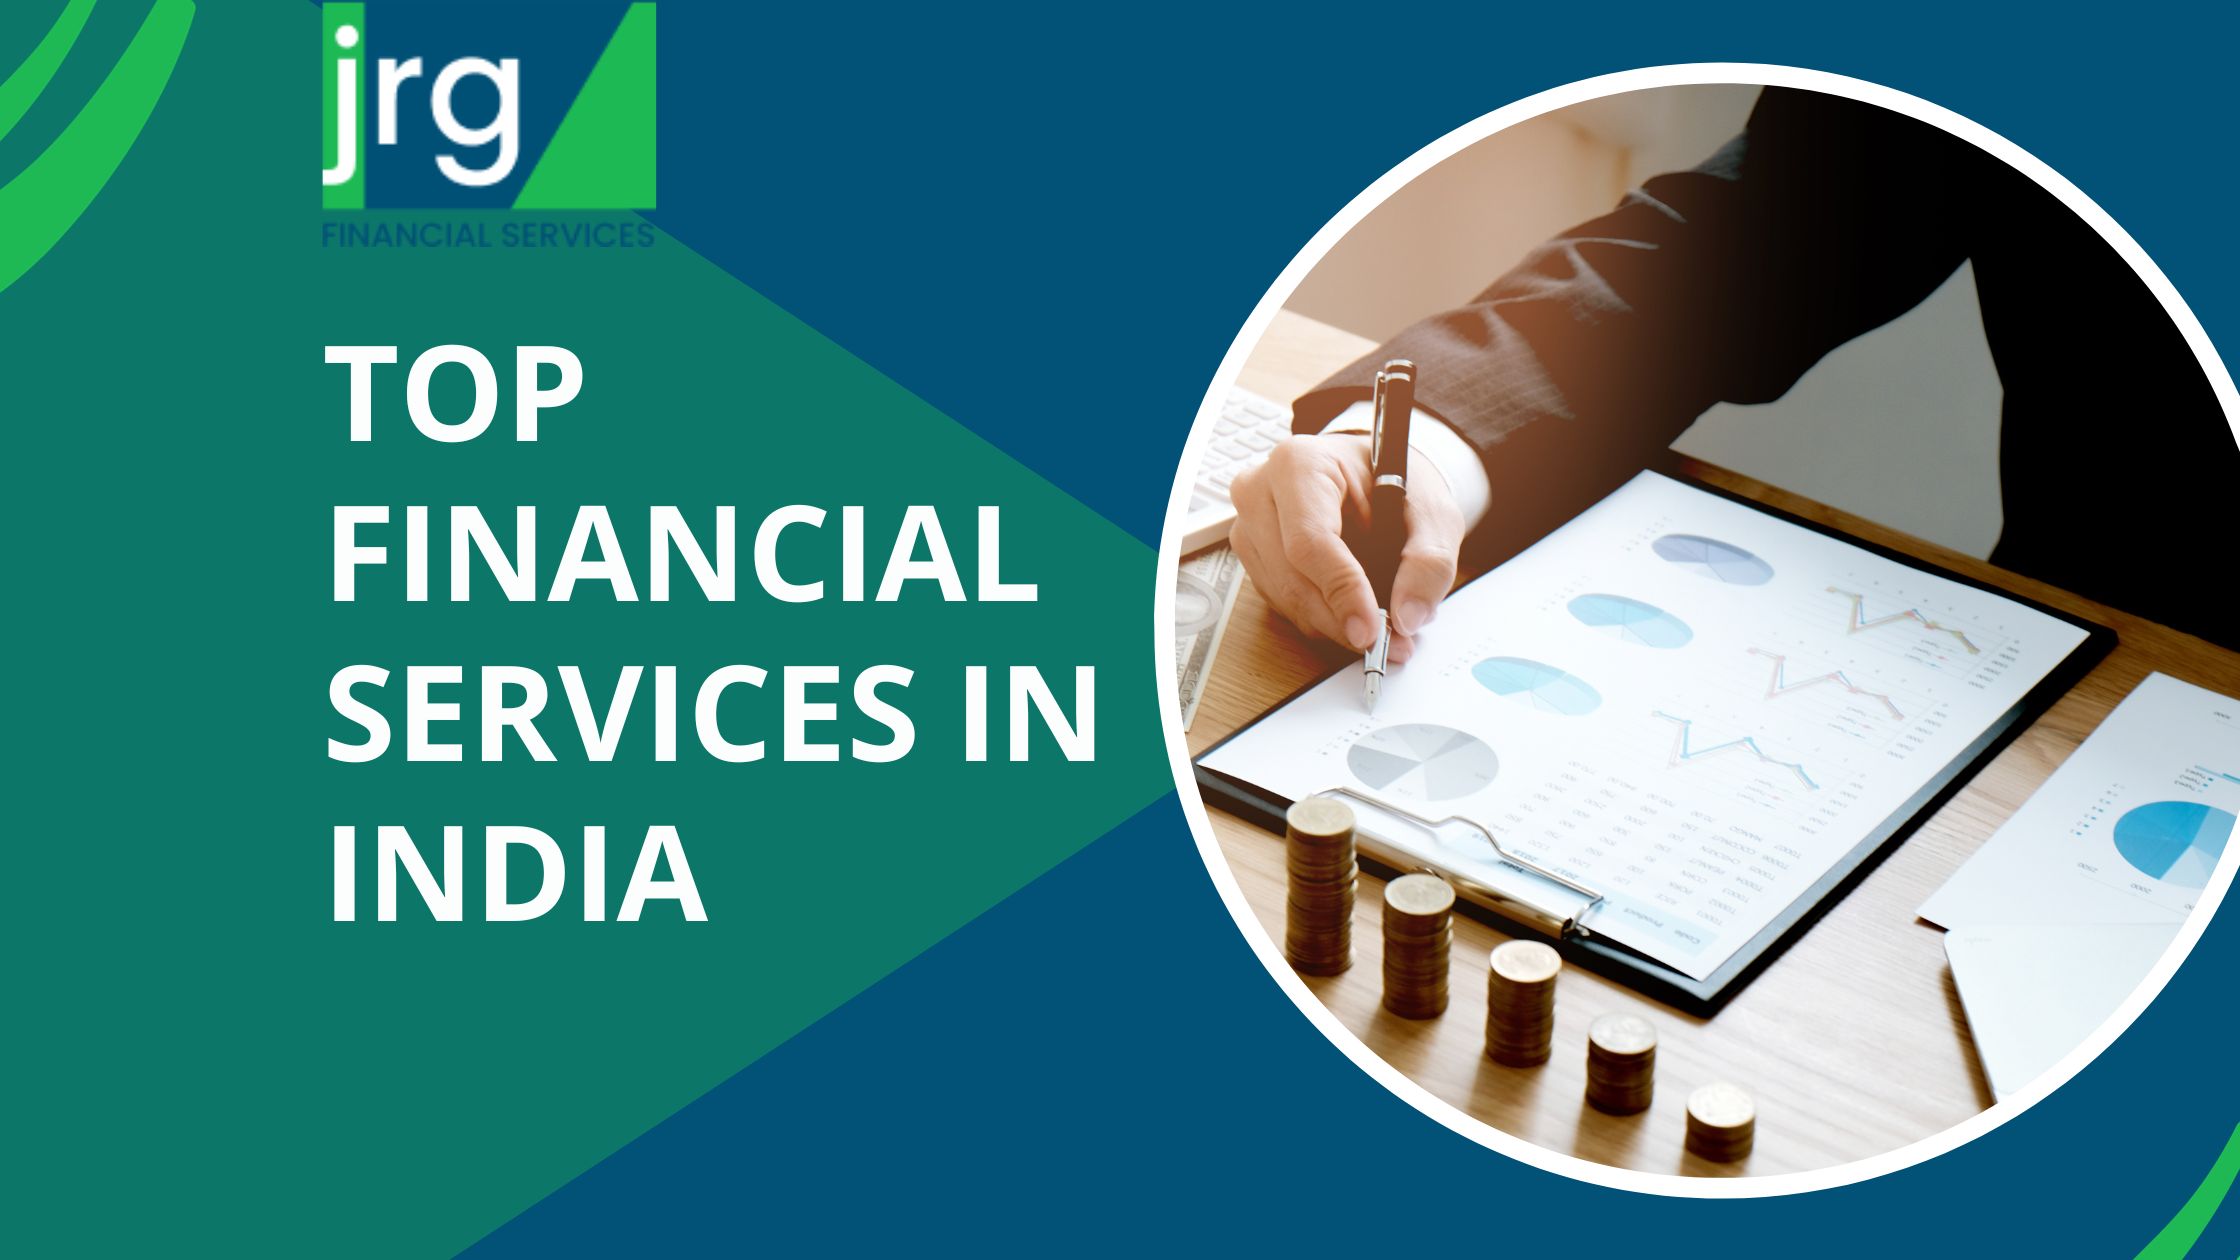 Top Financial Services in India